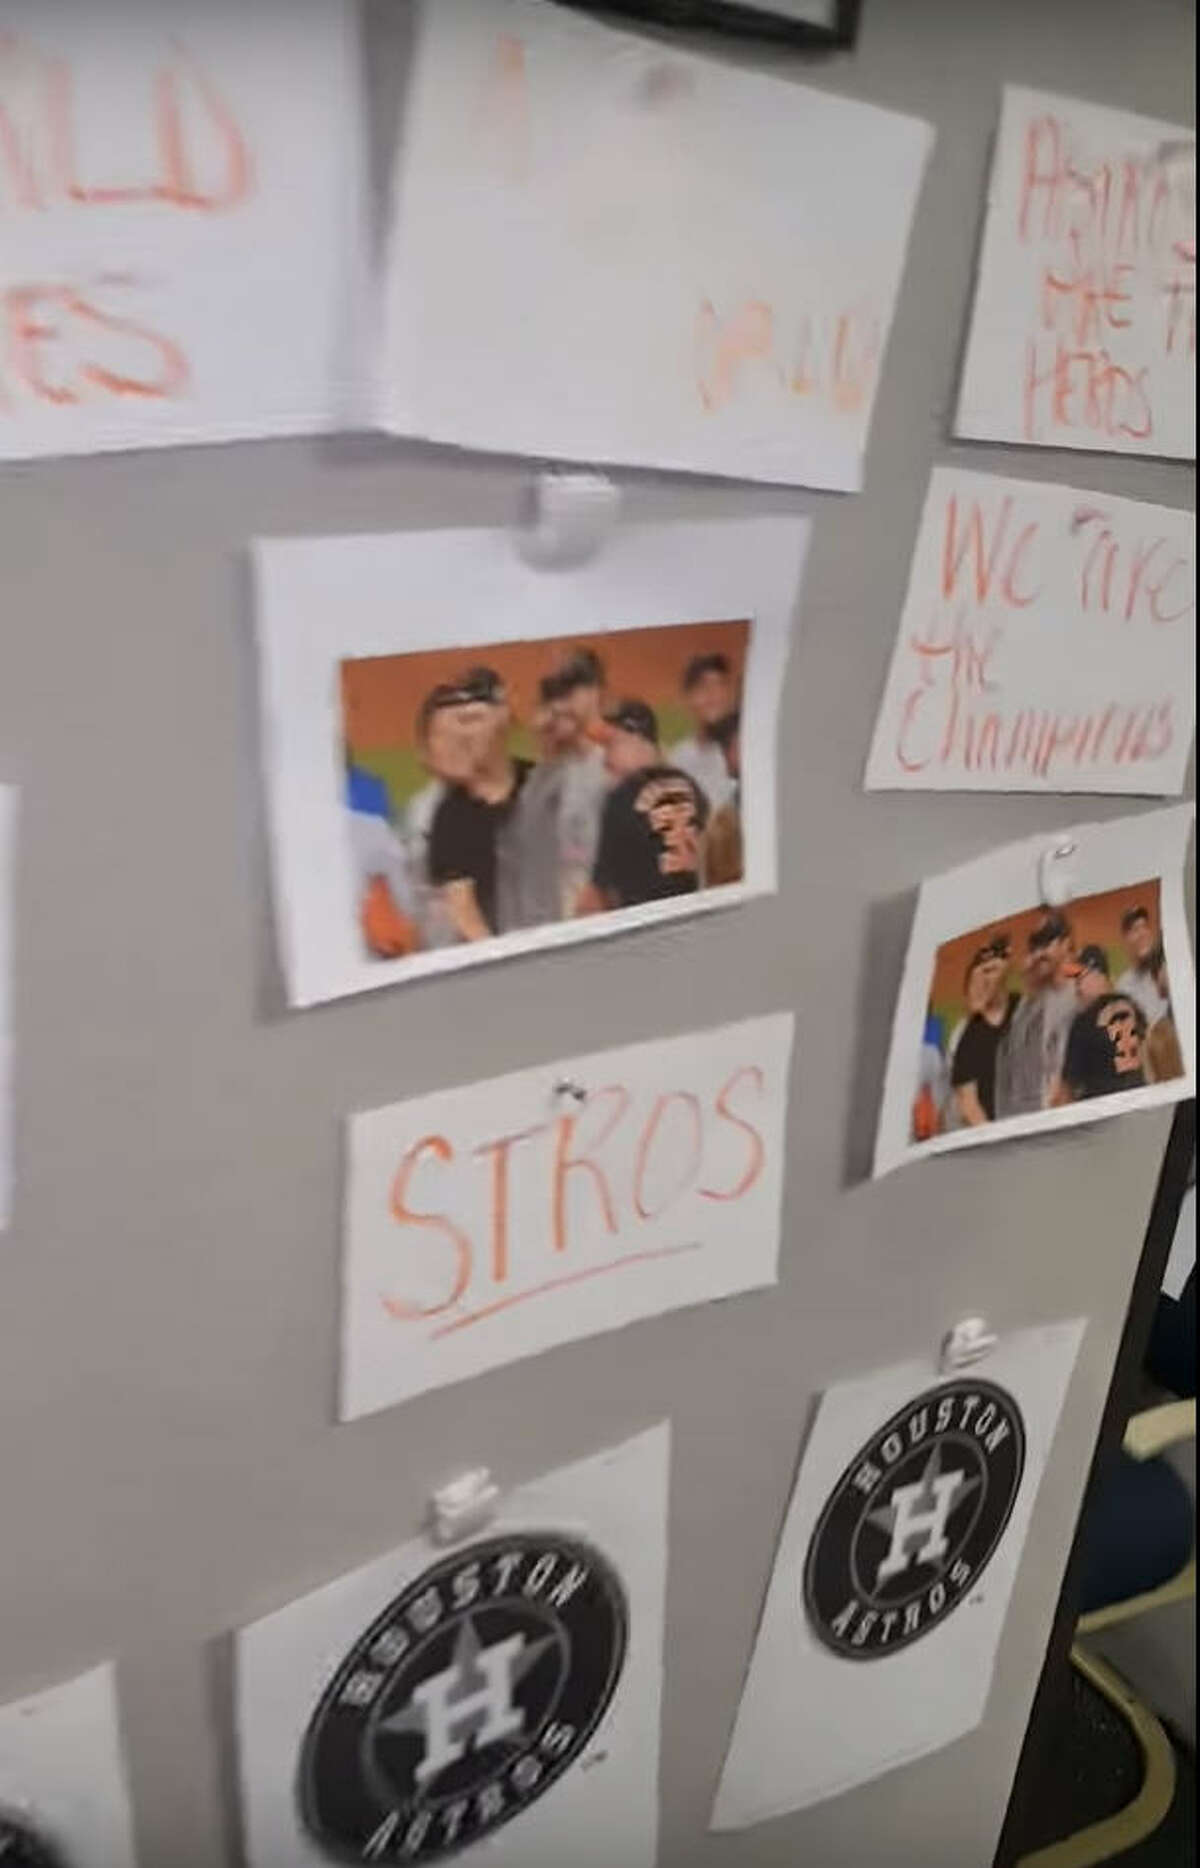 A lone Los Angeles Dodgers fan and Houston Health Department employee found his cubicle covered in Astros photos Thursday courtesy of fans in the office.